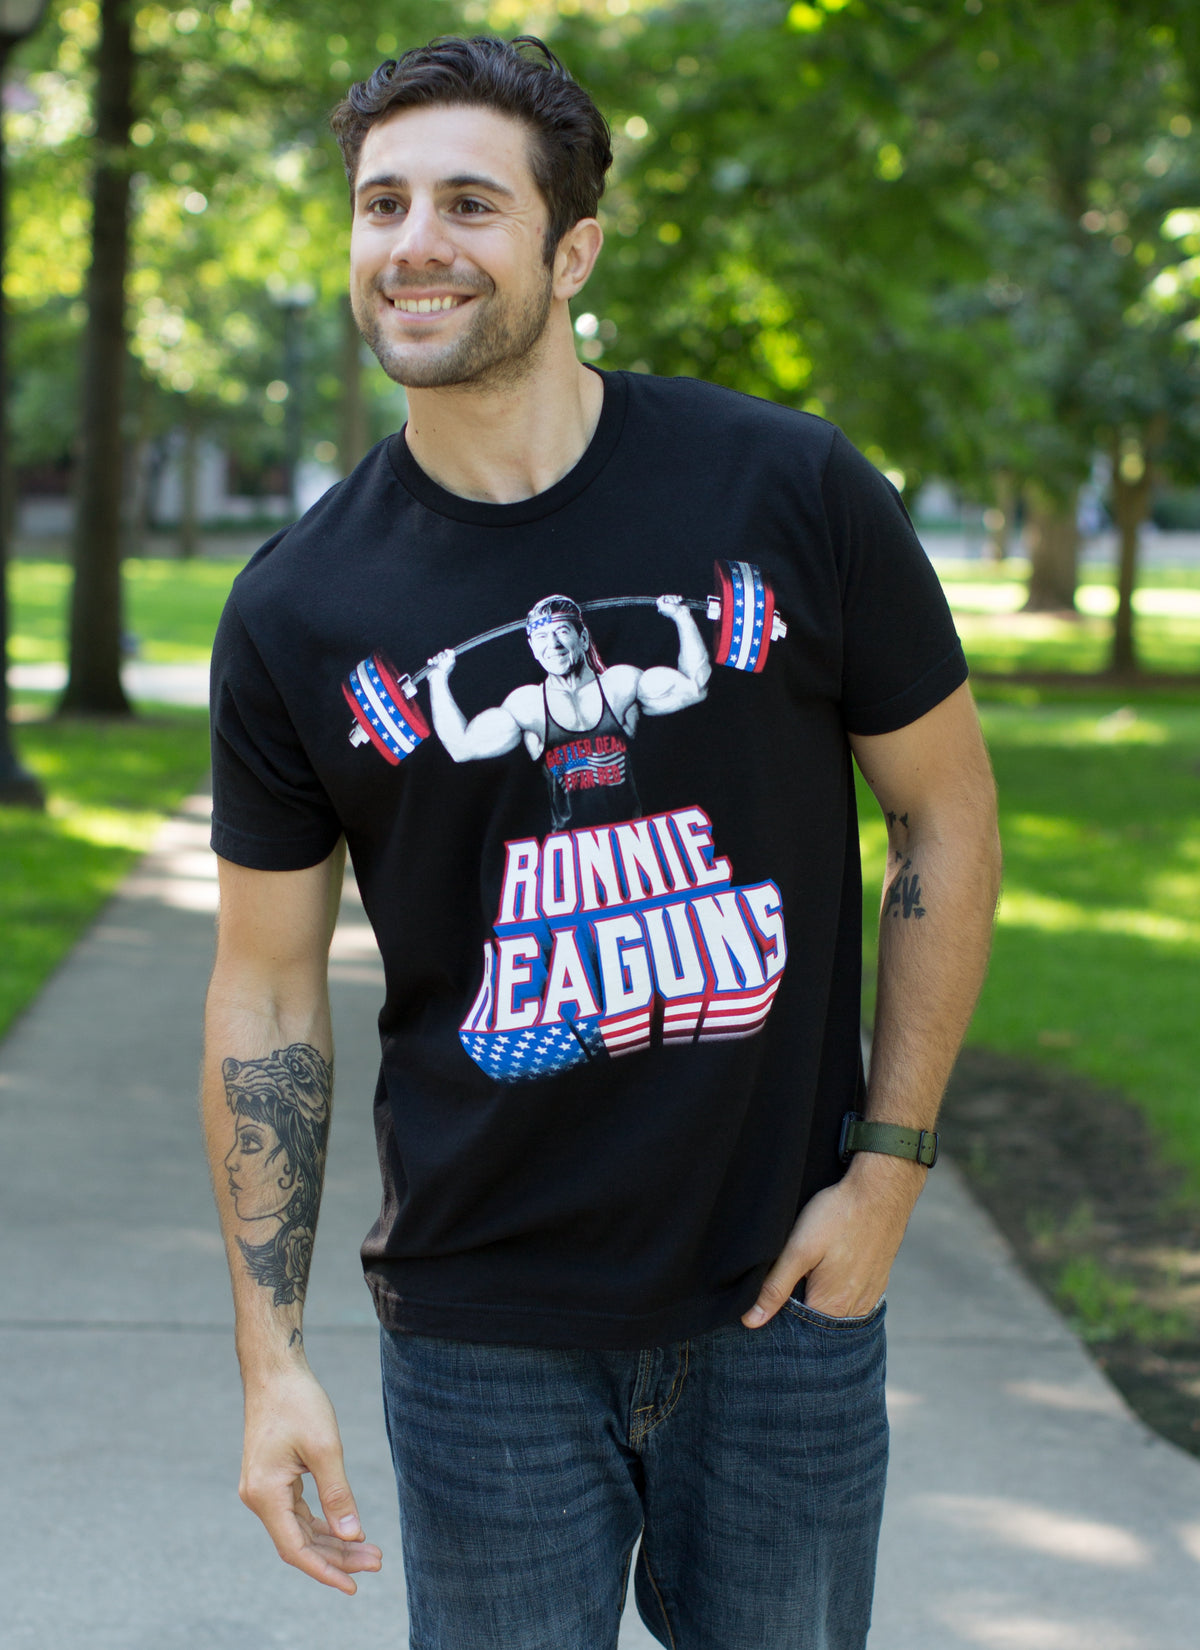 Ronnie ReaGUNS | Funny Muscle Weight Lifting Work Out Patriot Merica USA T-shirt - Men's/Unisex